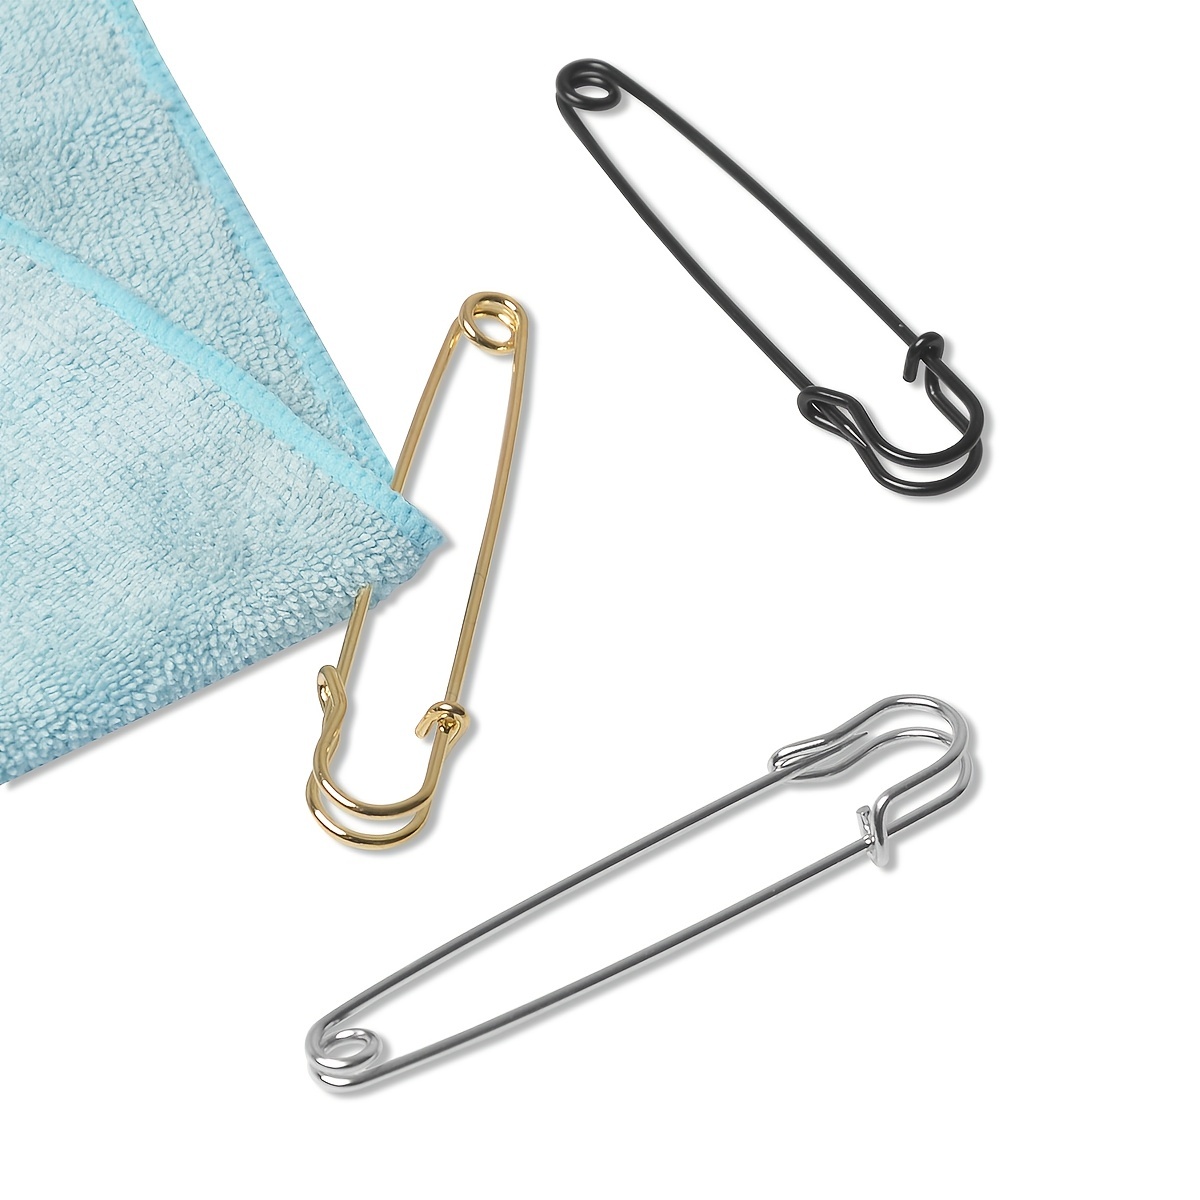 Large Safety Pins Pack of 40, Safety Pins Heavy Duty Assorted (2, 2.5,  3), Blanket Pins Safety Pin Extra Sturdy Bulk Pins for Blankets, Skirts